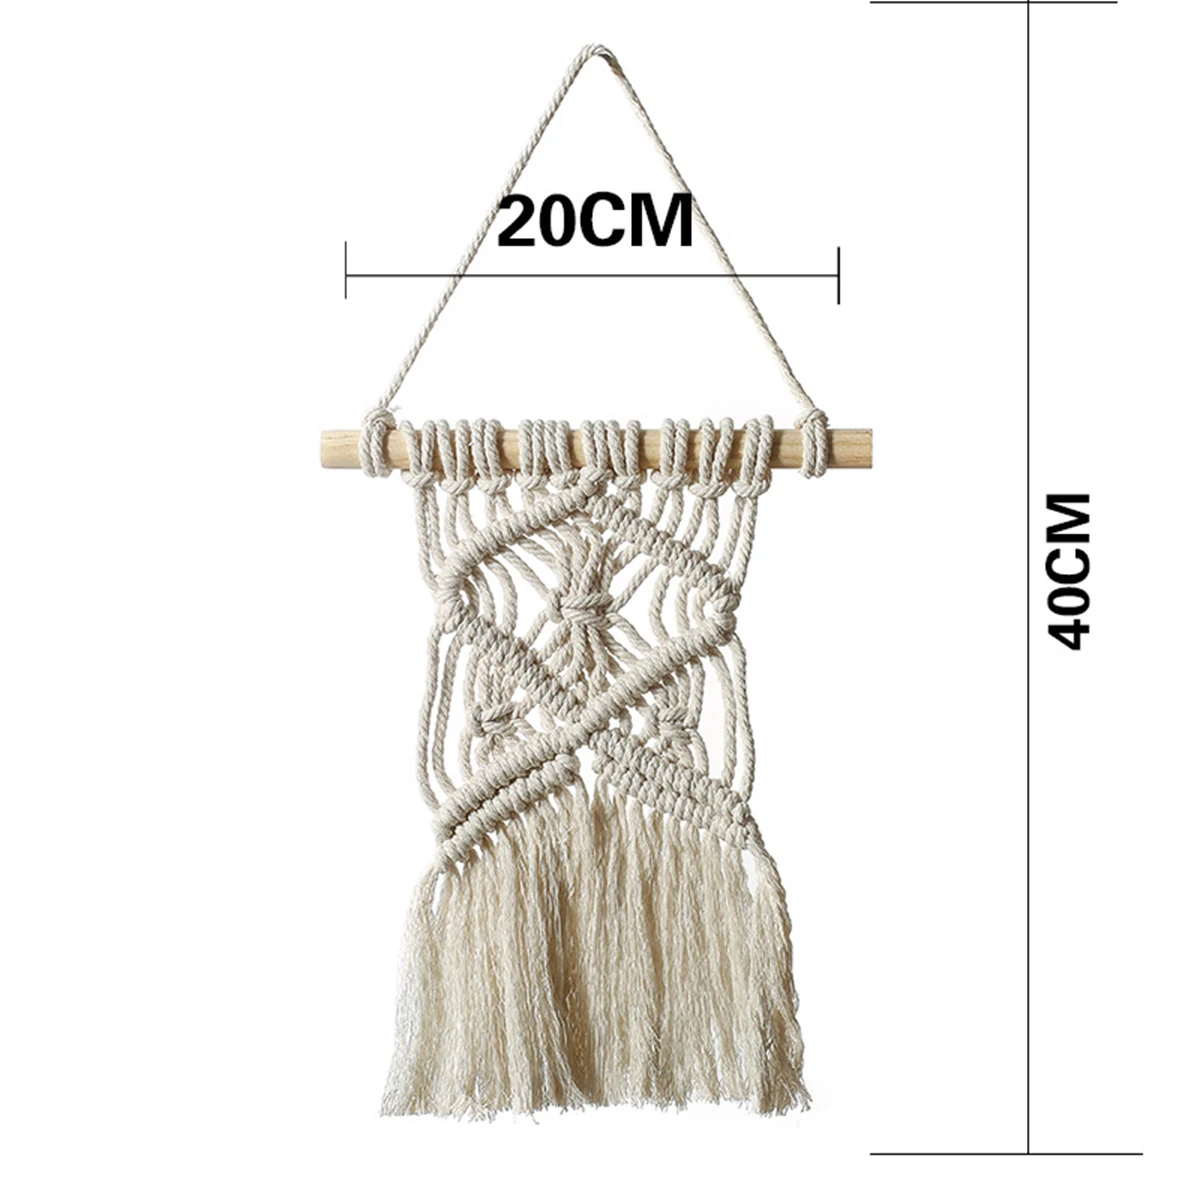 

Dream Net Wall Decoration Weaving Tapestry Tassels Decorate Hanging Living Room Home Furnishing Ornament Pendant